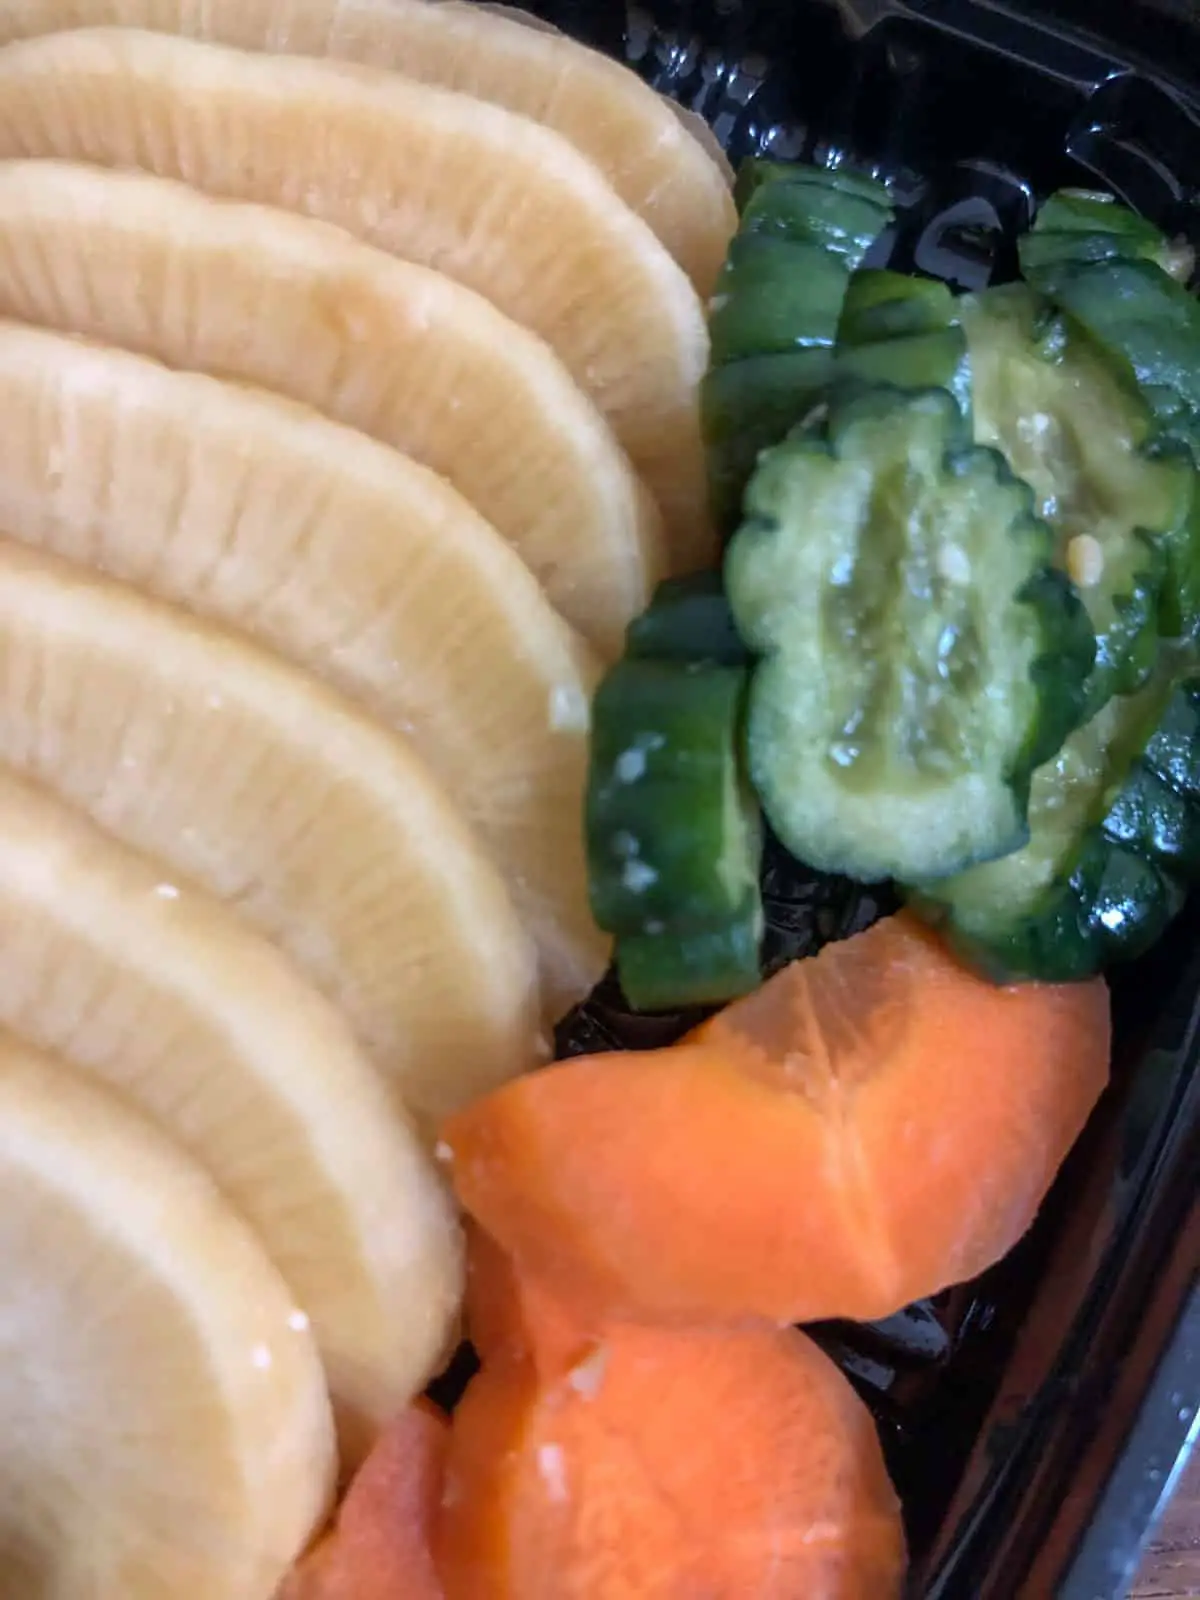 An assortment of Japanese pickles including daikon, cucumbers, and carrots. 